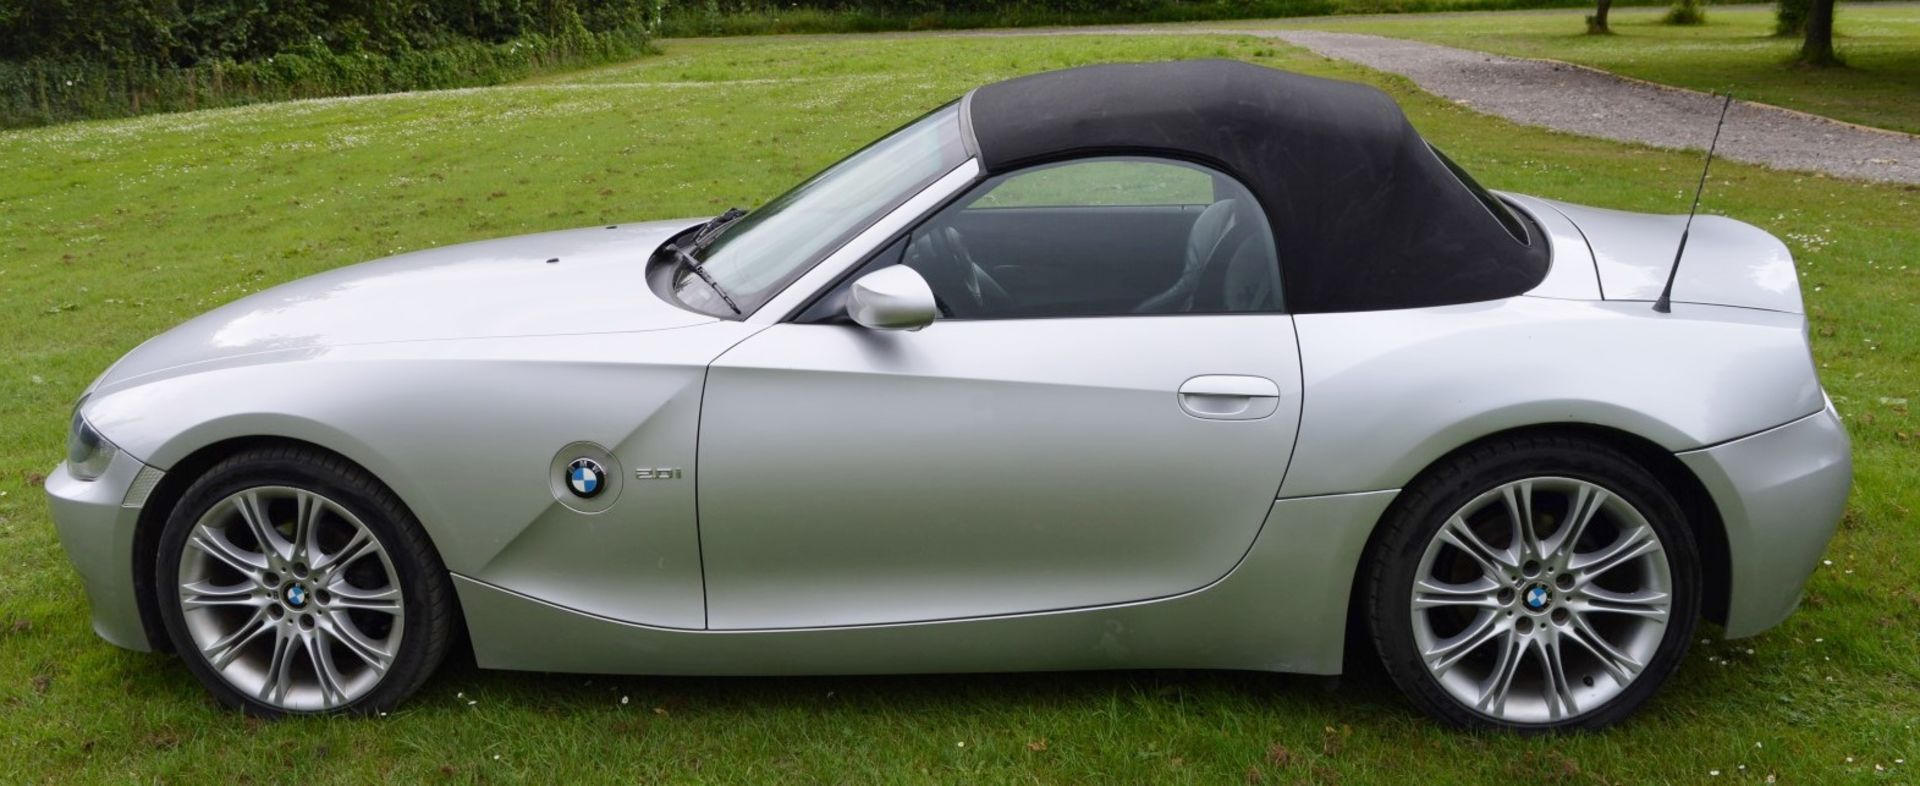 1 x BMW M Sport Convertible Z4 2.0i - 2008 58 Plate - 54,000 Miles - Silver Finish - Power Roof - - Image 44 of 47